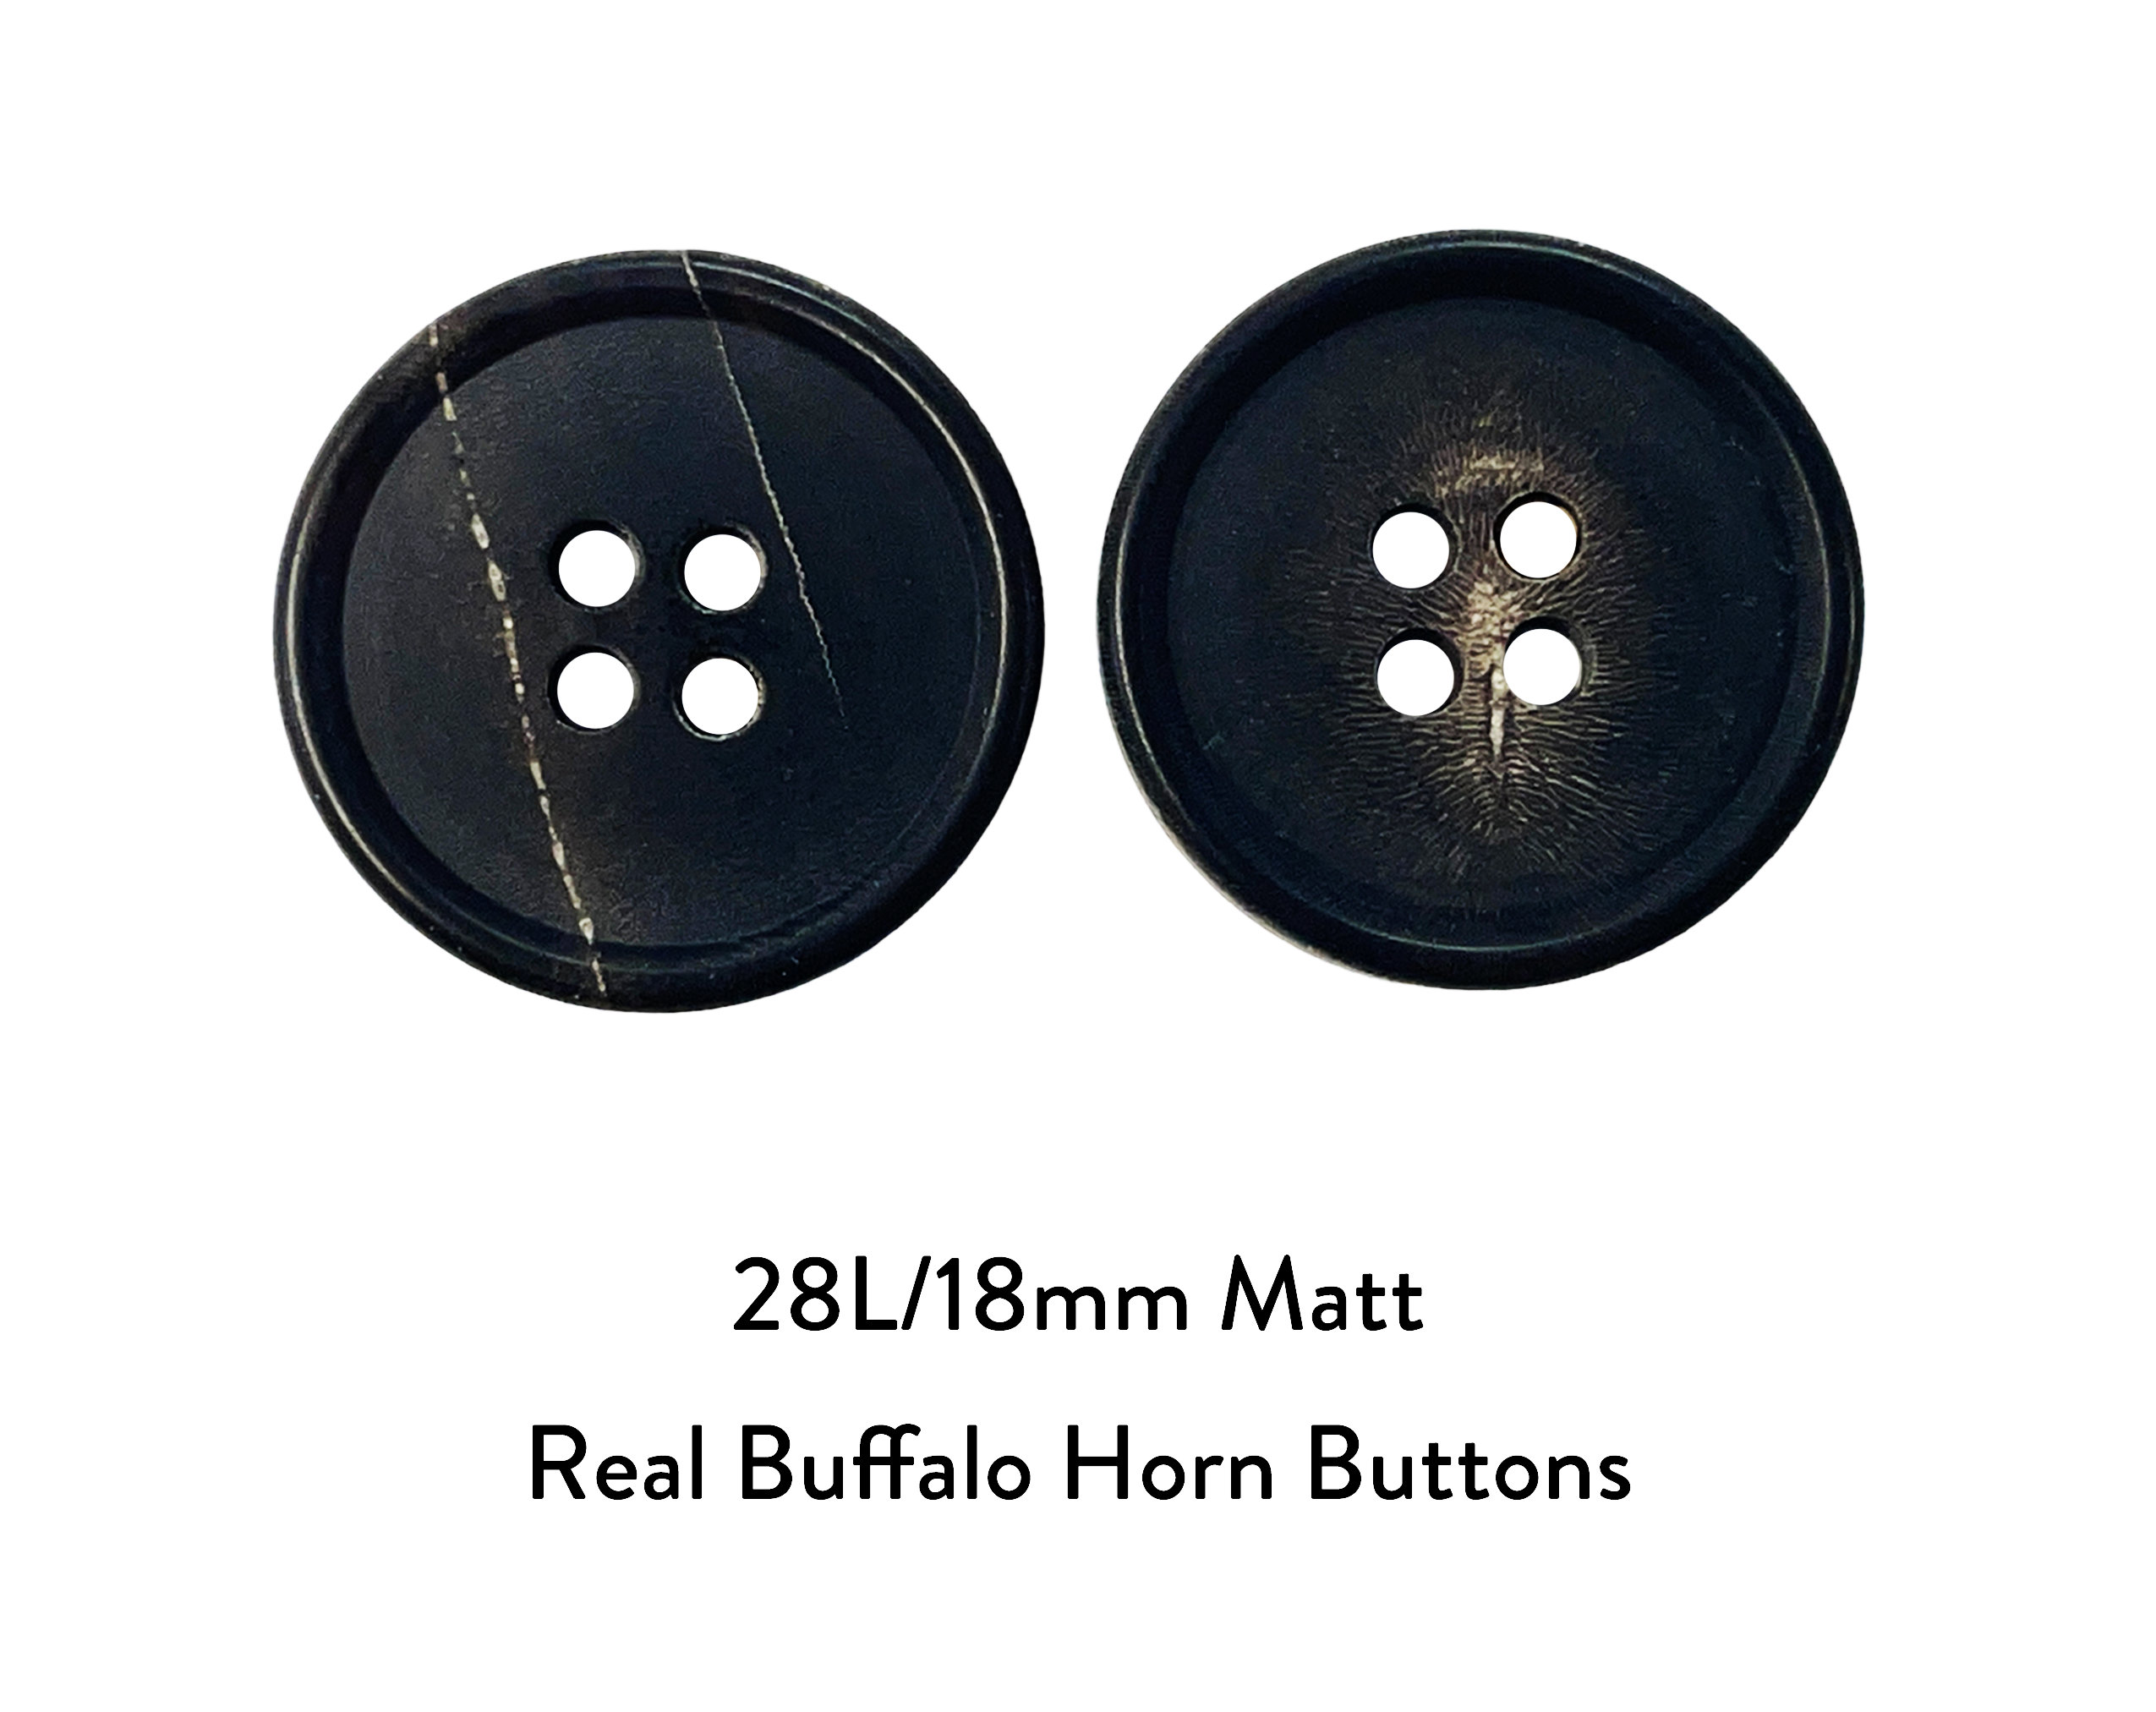 Sharp and Modern Black Buffalo Horn Suit and Coat Buttons